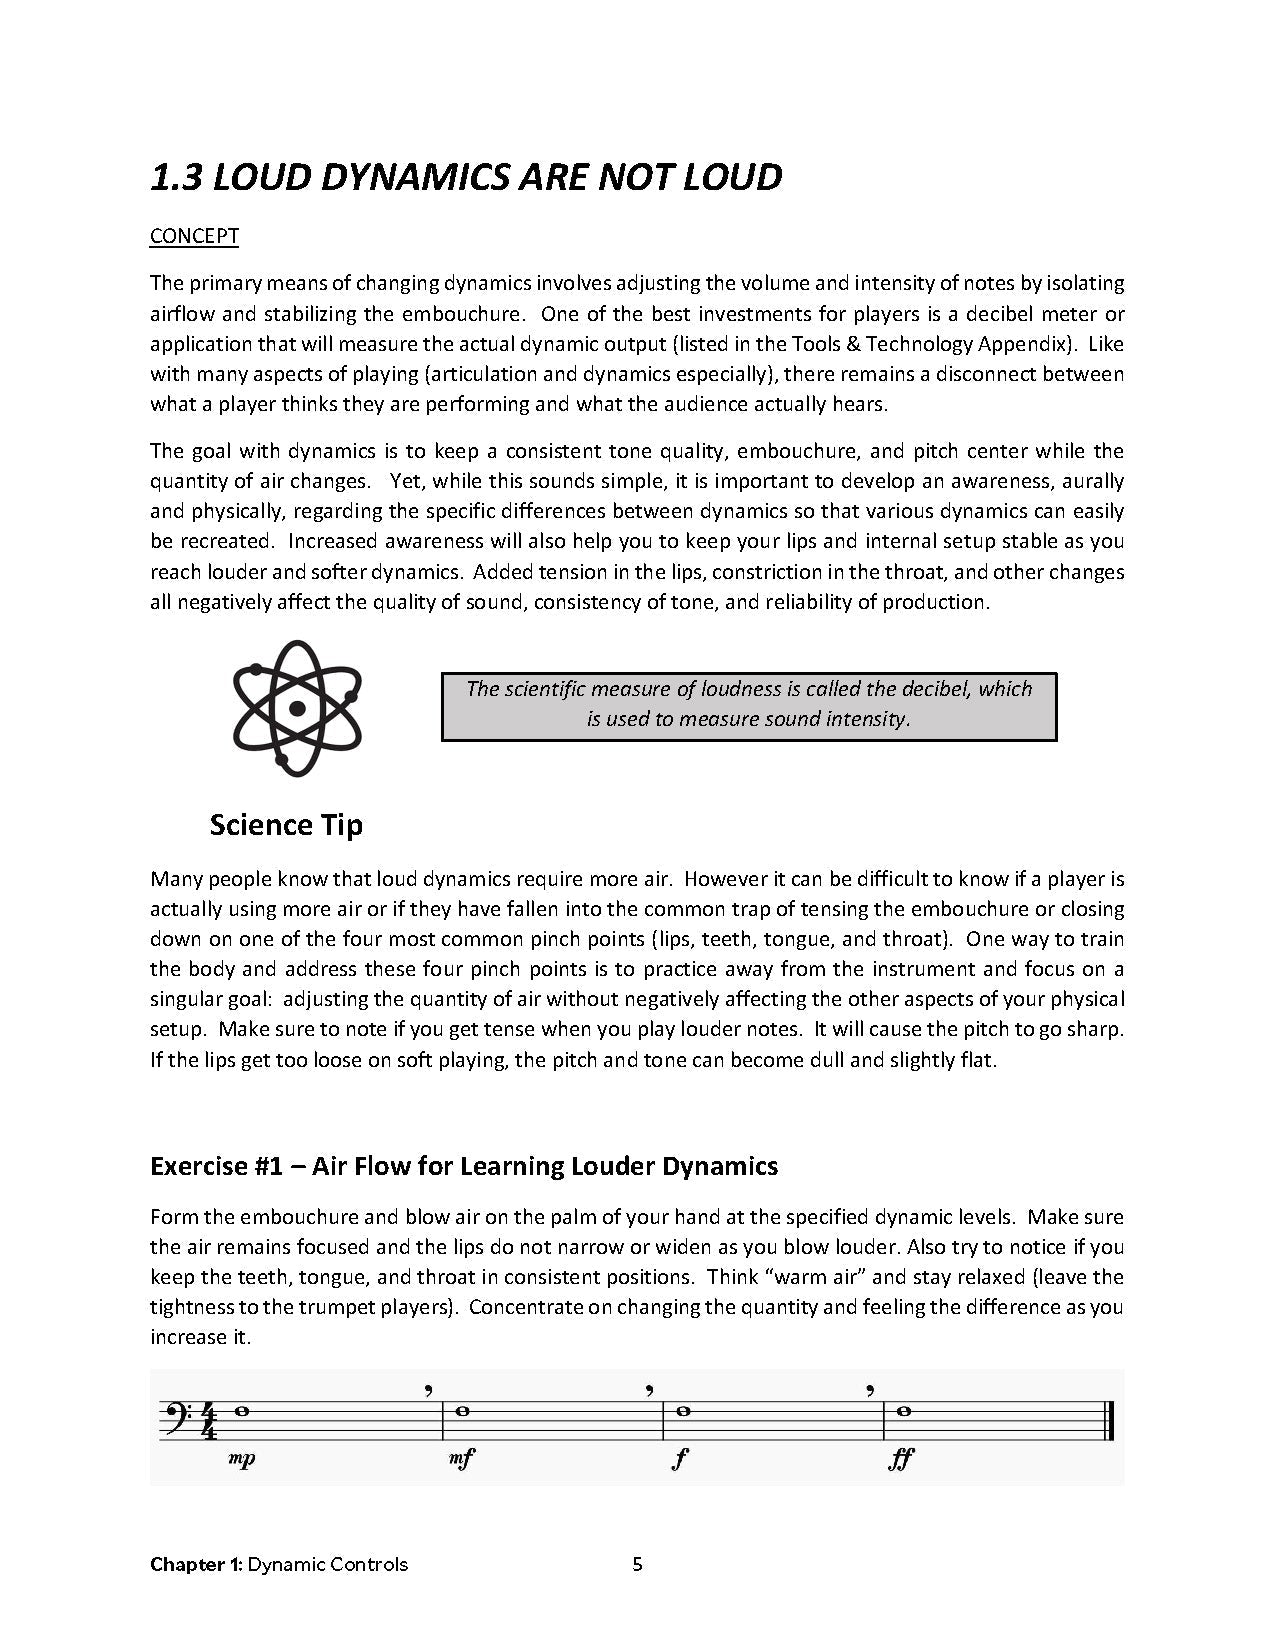 The Art of Practice - BASS Clef - English - DOWNLOAD